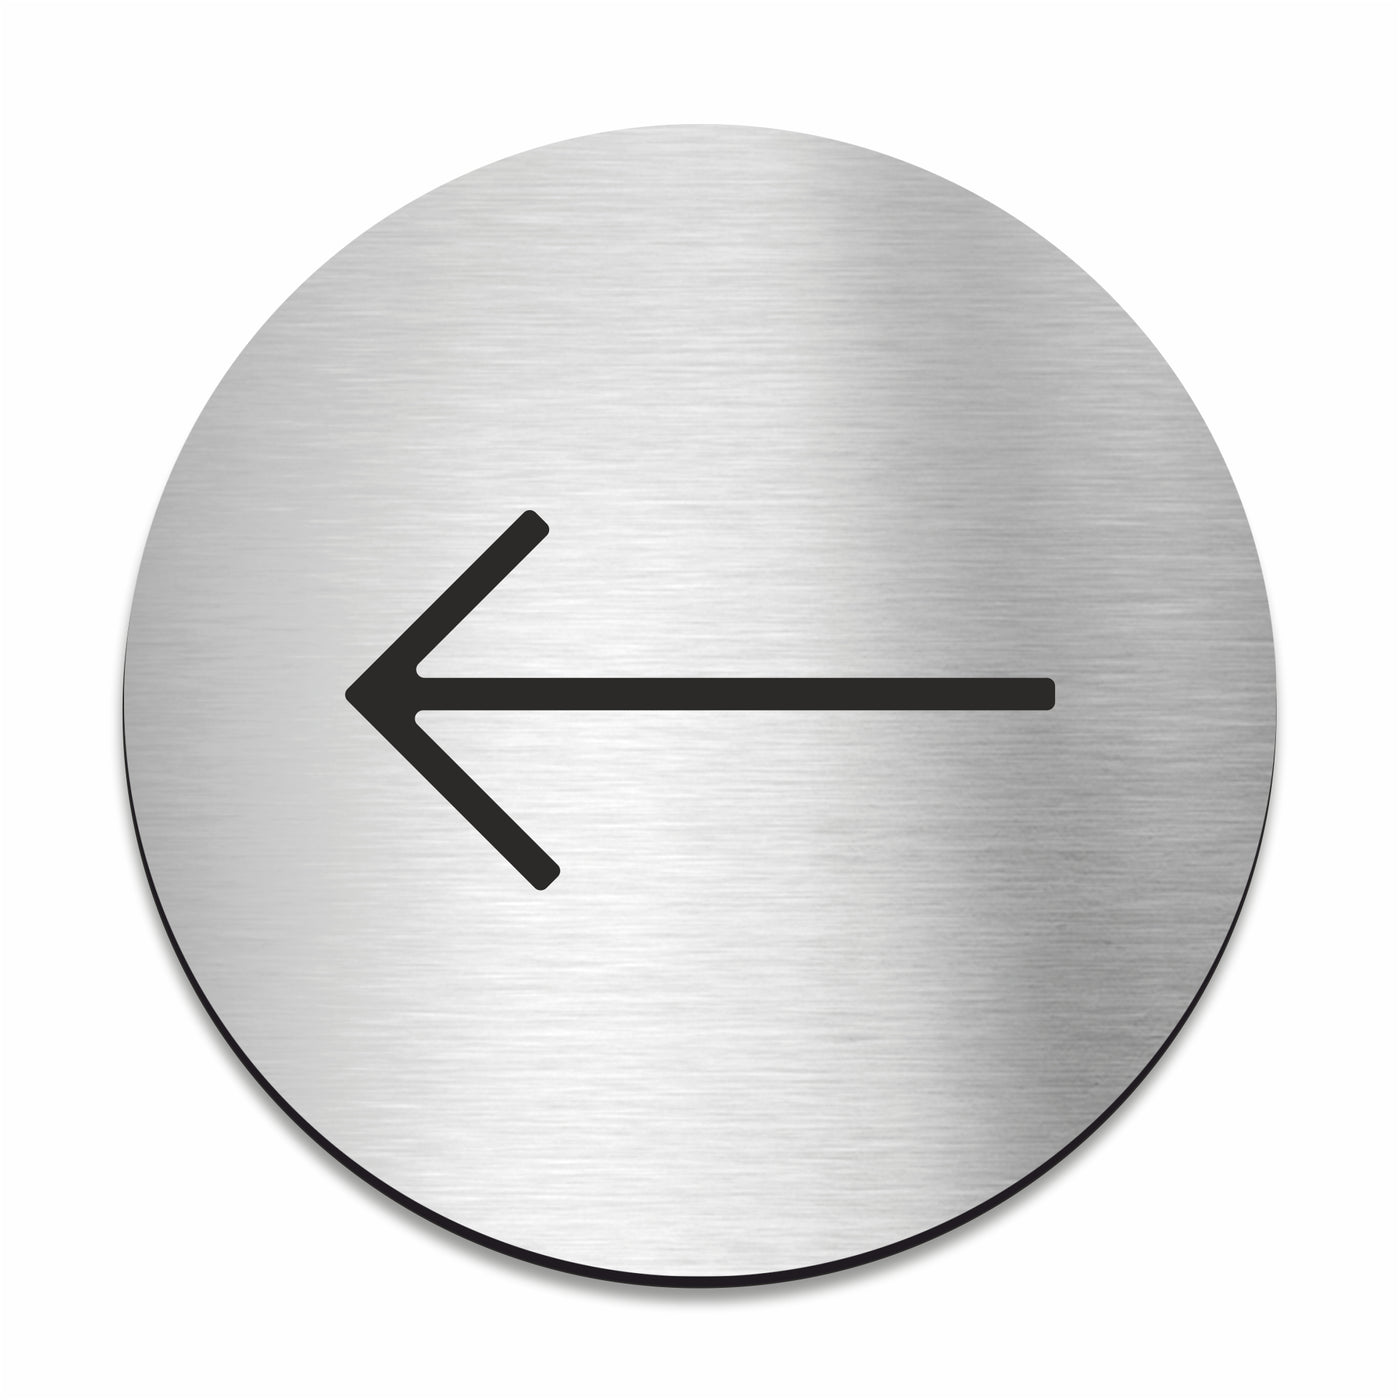 Metal Directional Arrow Sign - Stainless steel